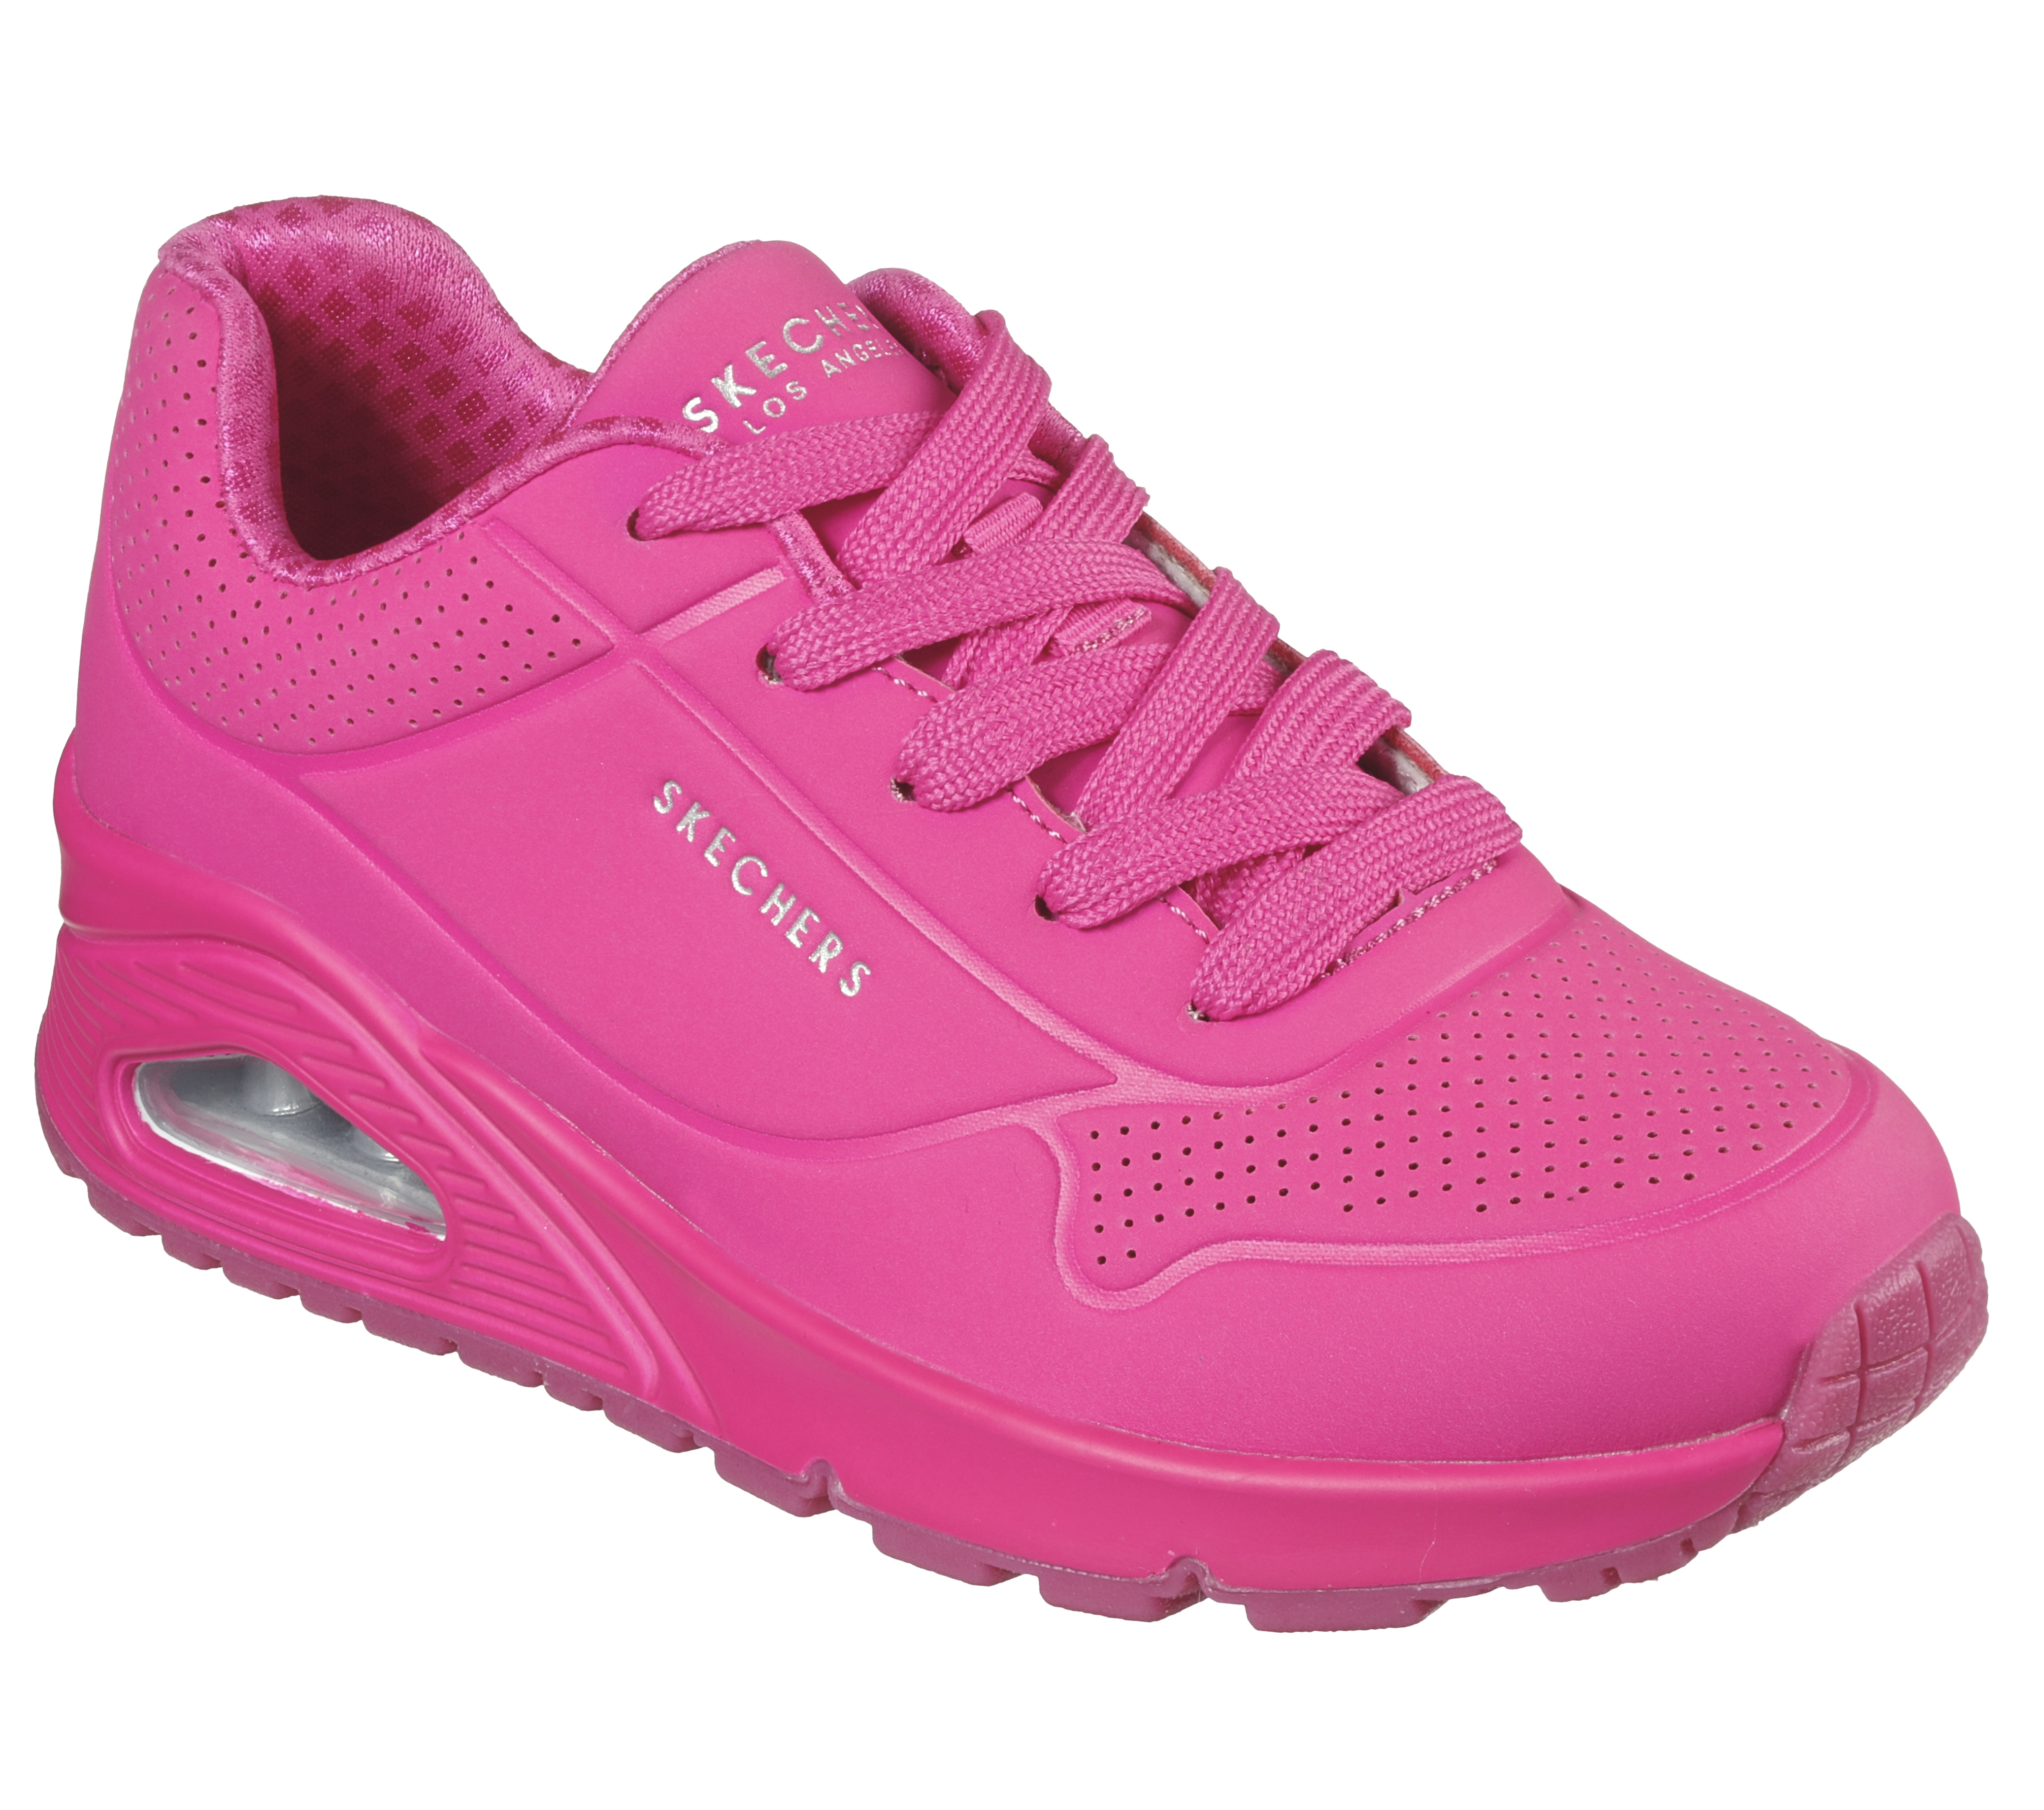 pink and blue skechers